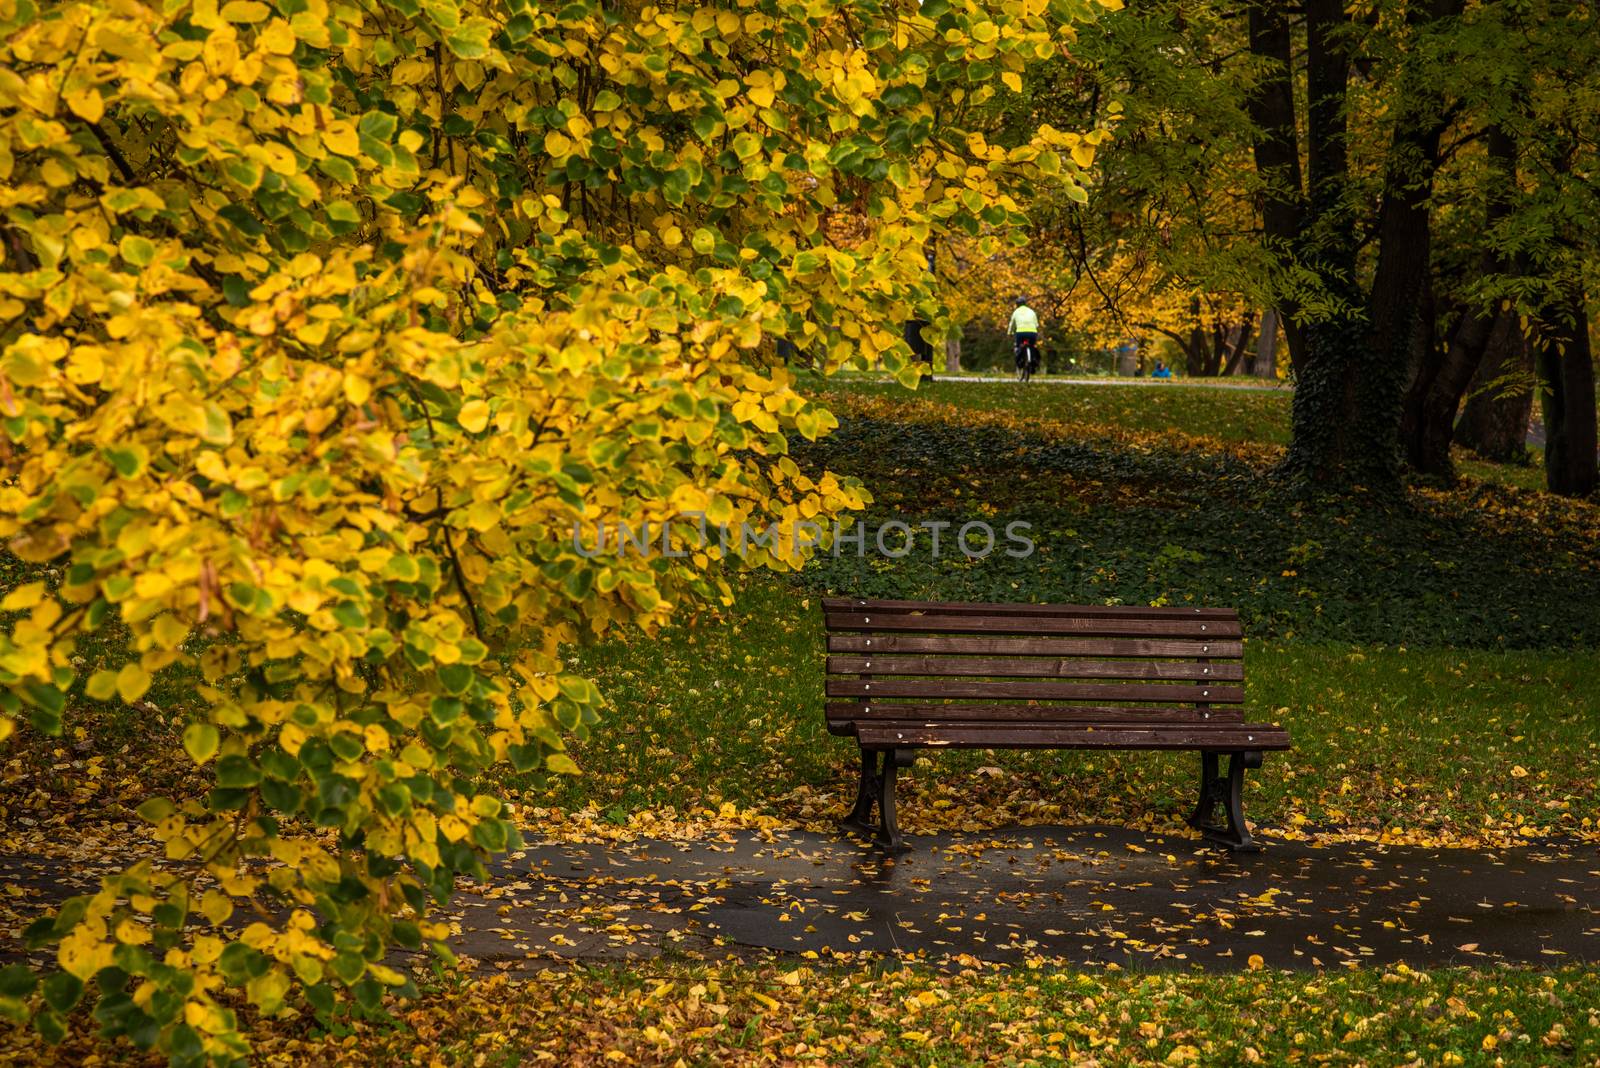 Empty wooden bench in a park surrounded with yellow leaves